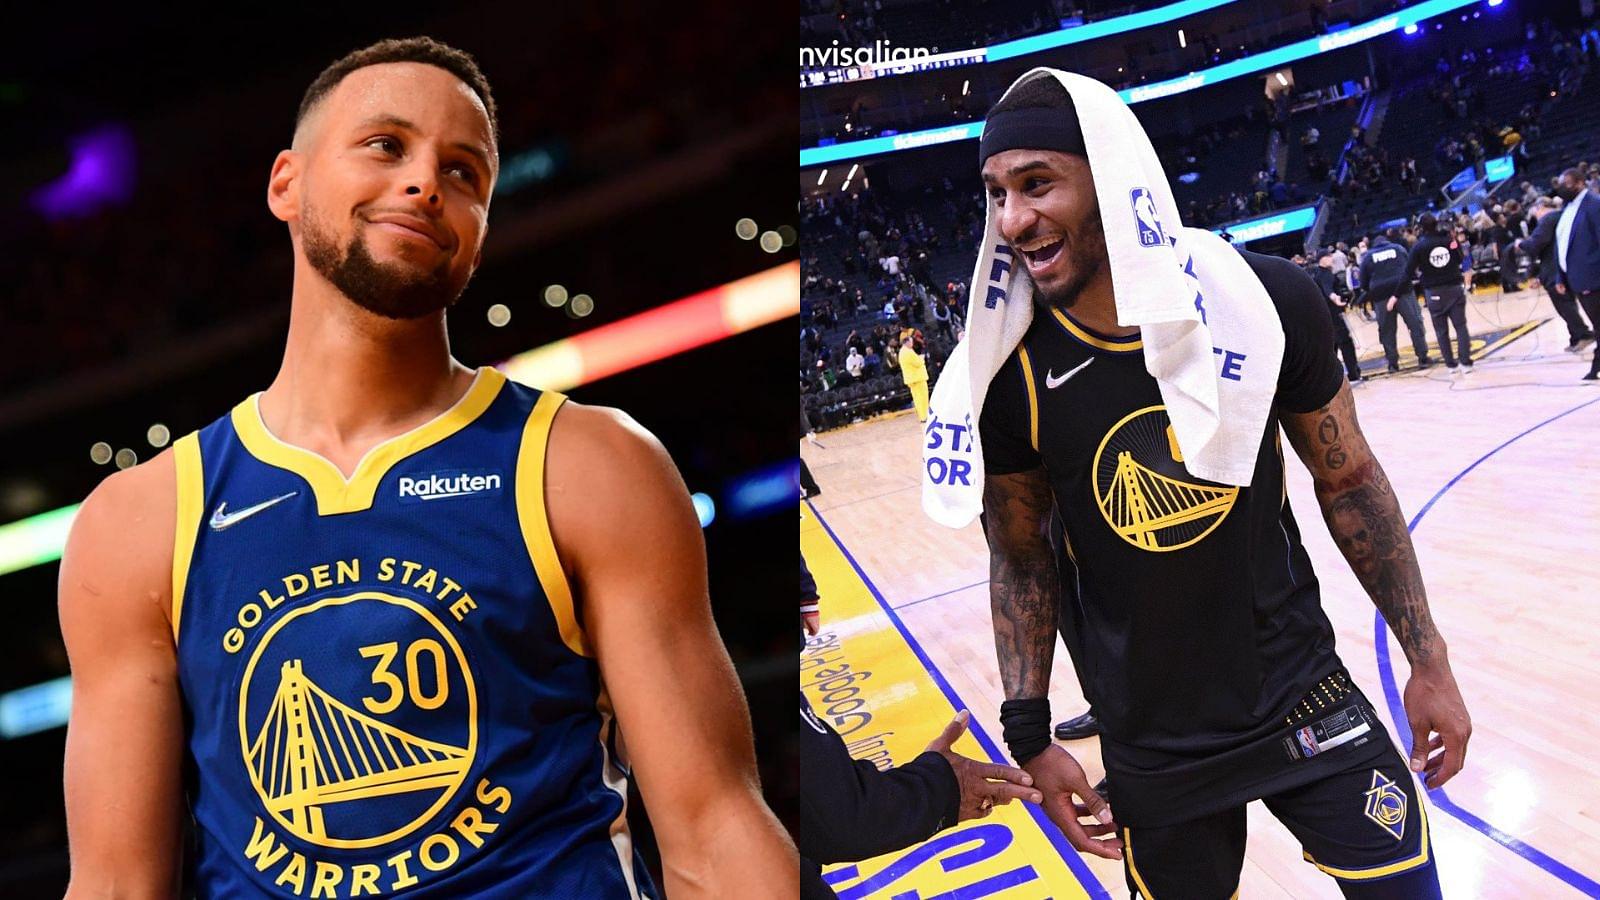 “Photoshop is real!! That doesn’t count Gary Payton II”: Stephen Curry hilariously denies appreciating an insane trick by his Warriors teammate, NBA Twitter does due diligence